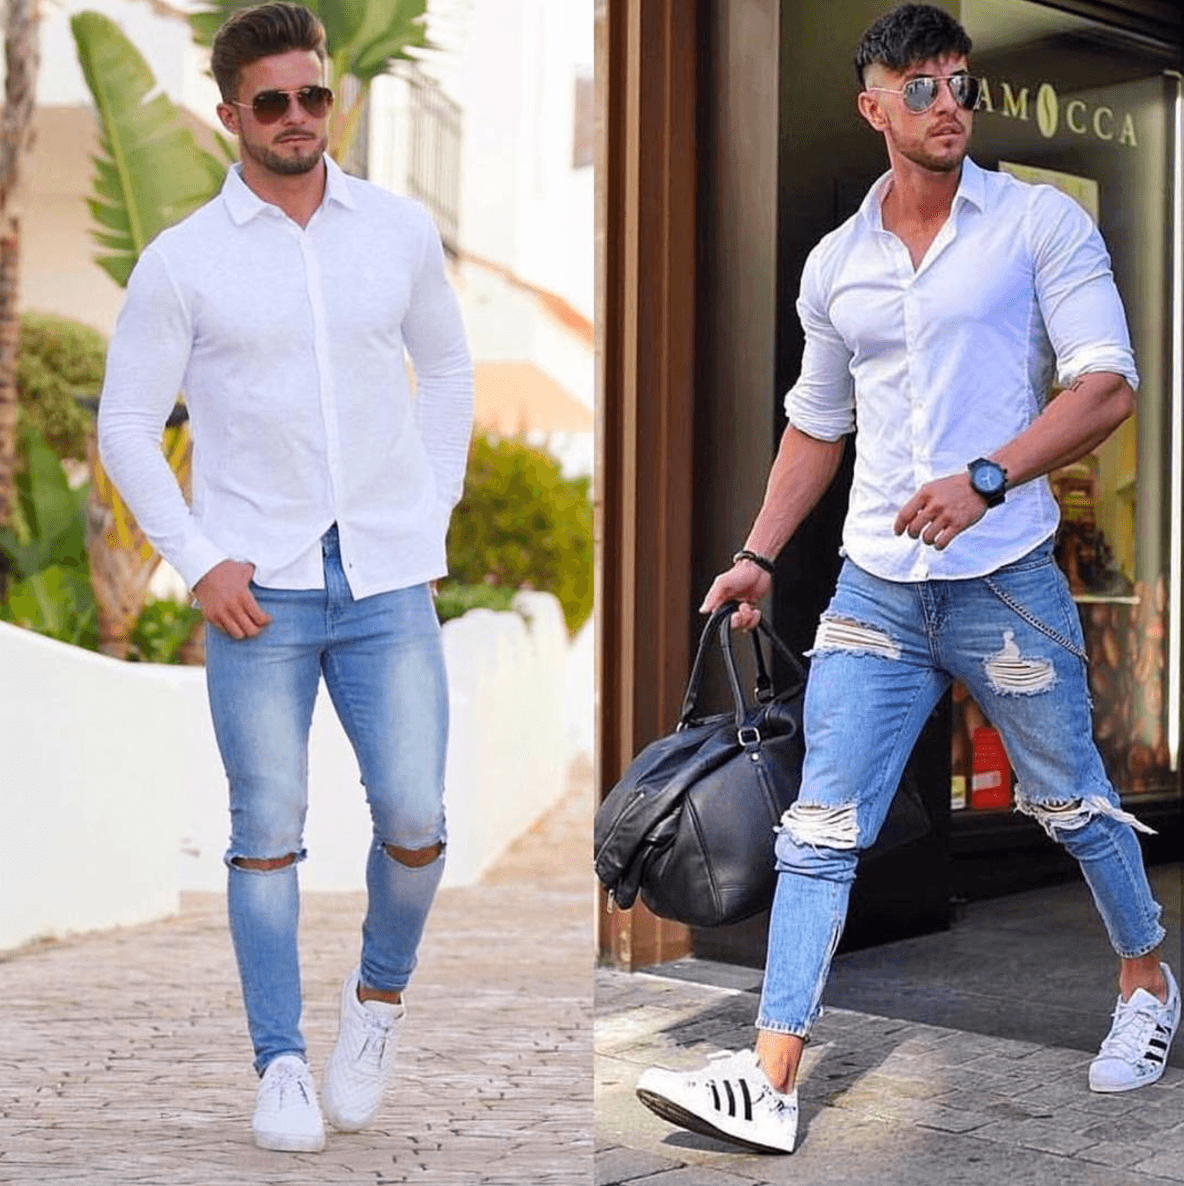 17 most popular street style fashion ideas for men 2018